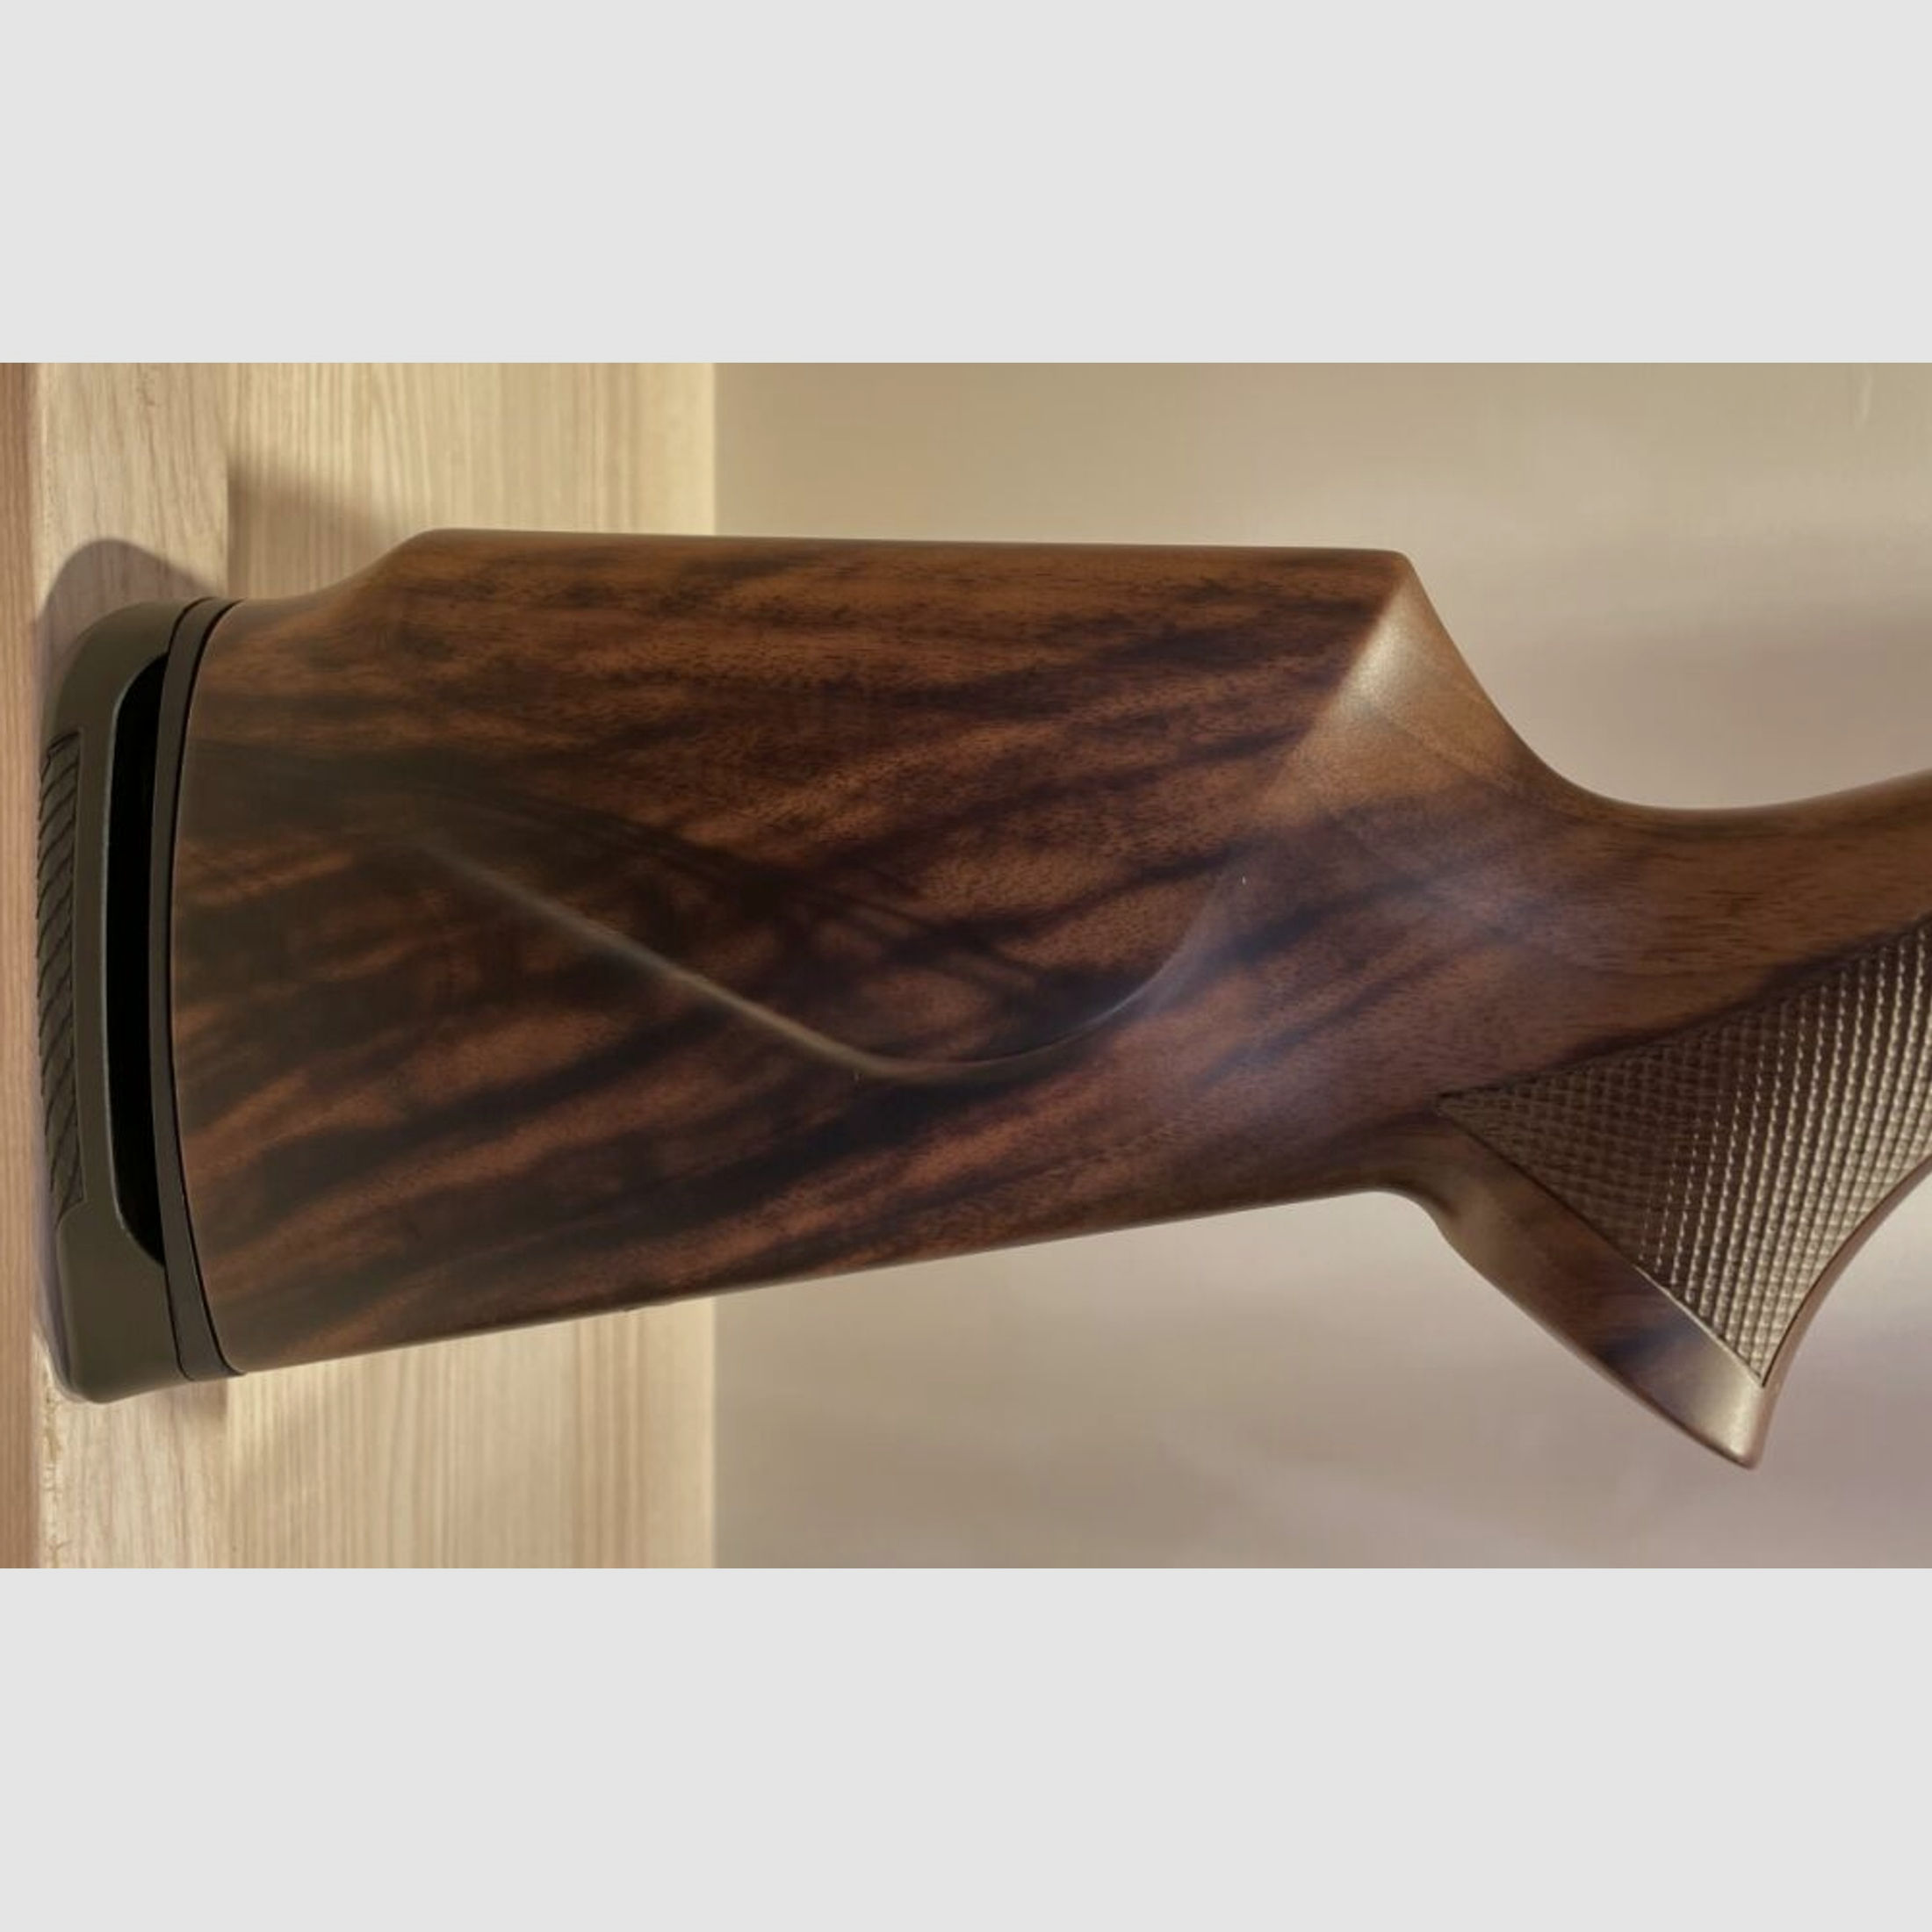 BENELLI	 LUPO BE.S.T. WOOD (LL 51 cm)